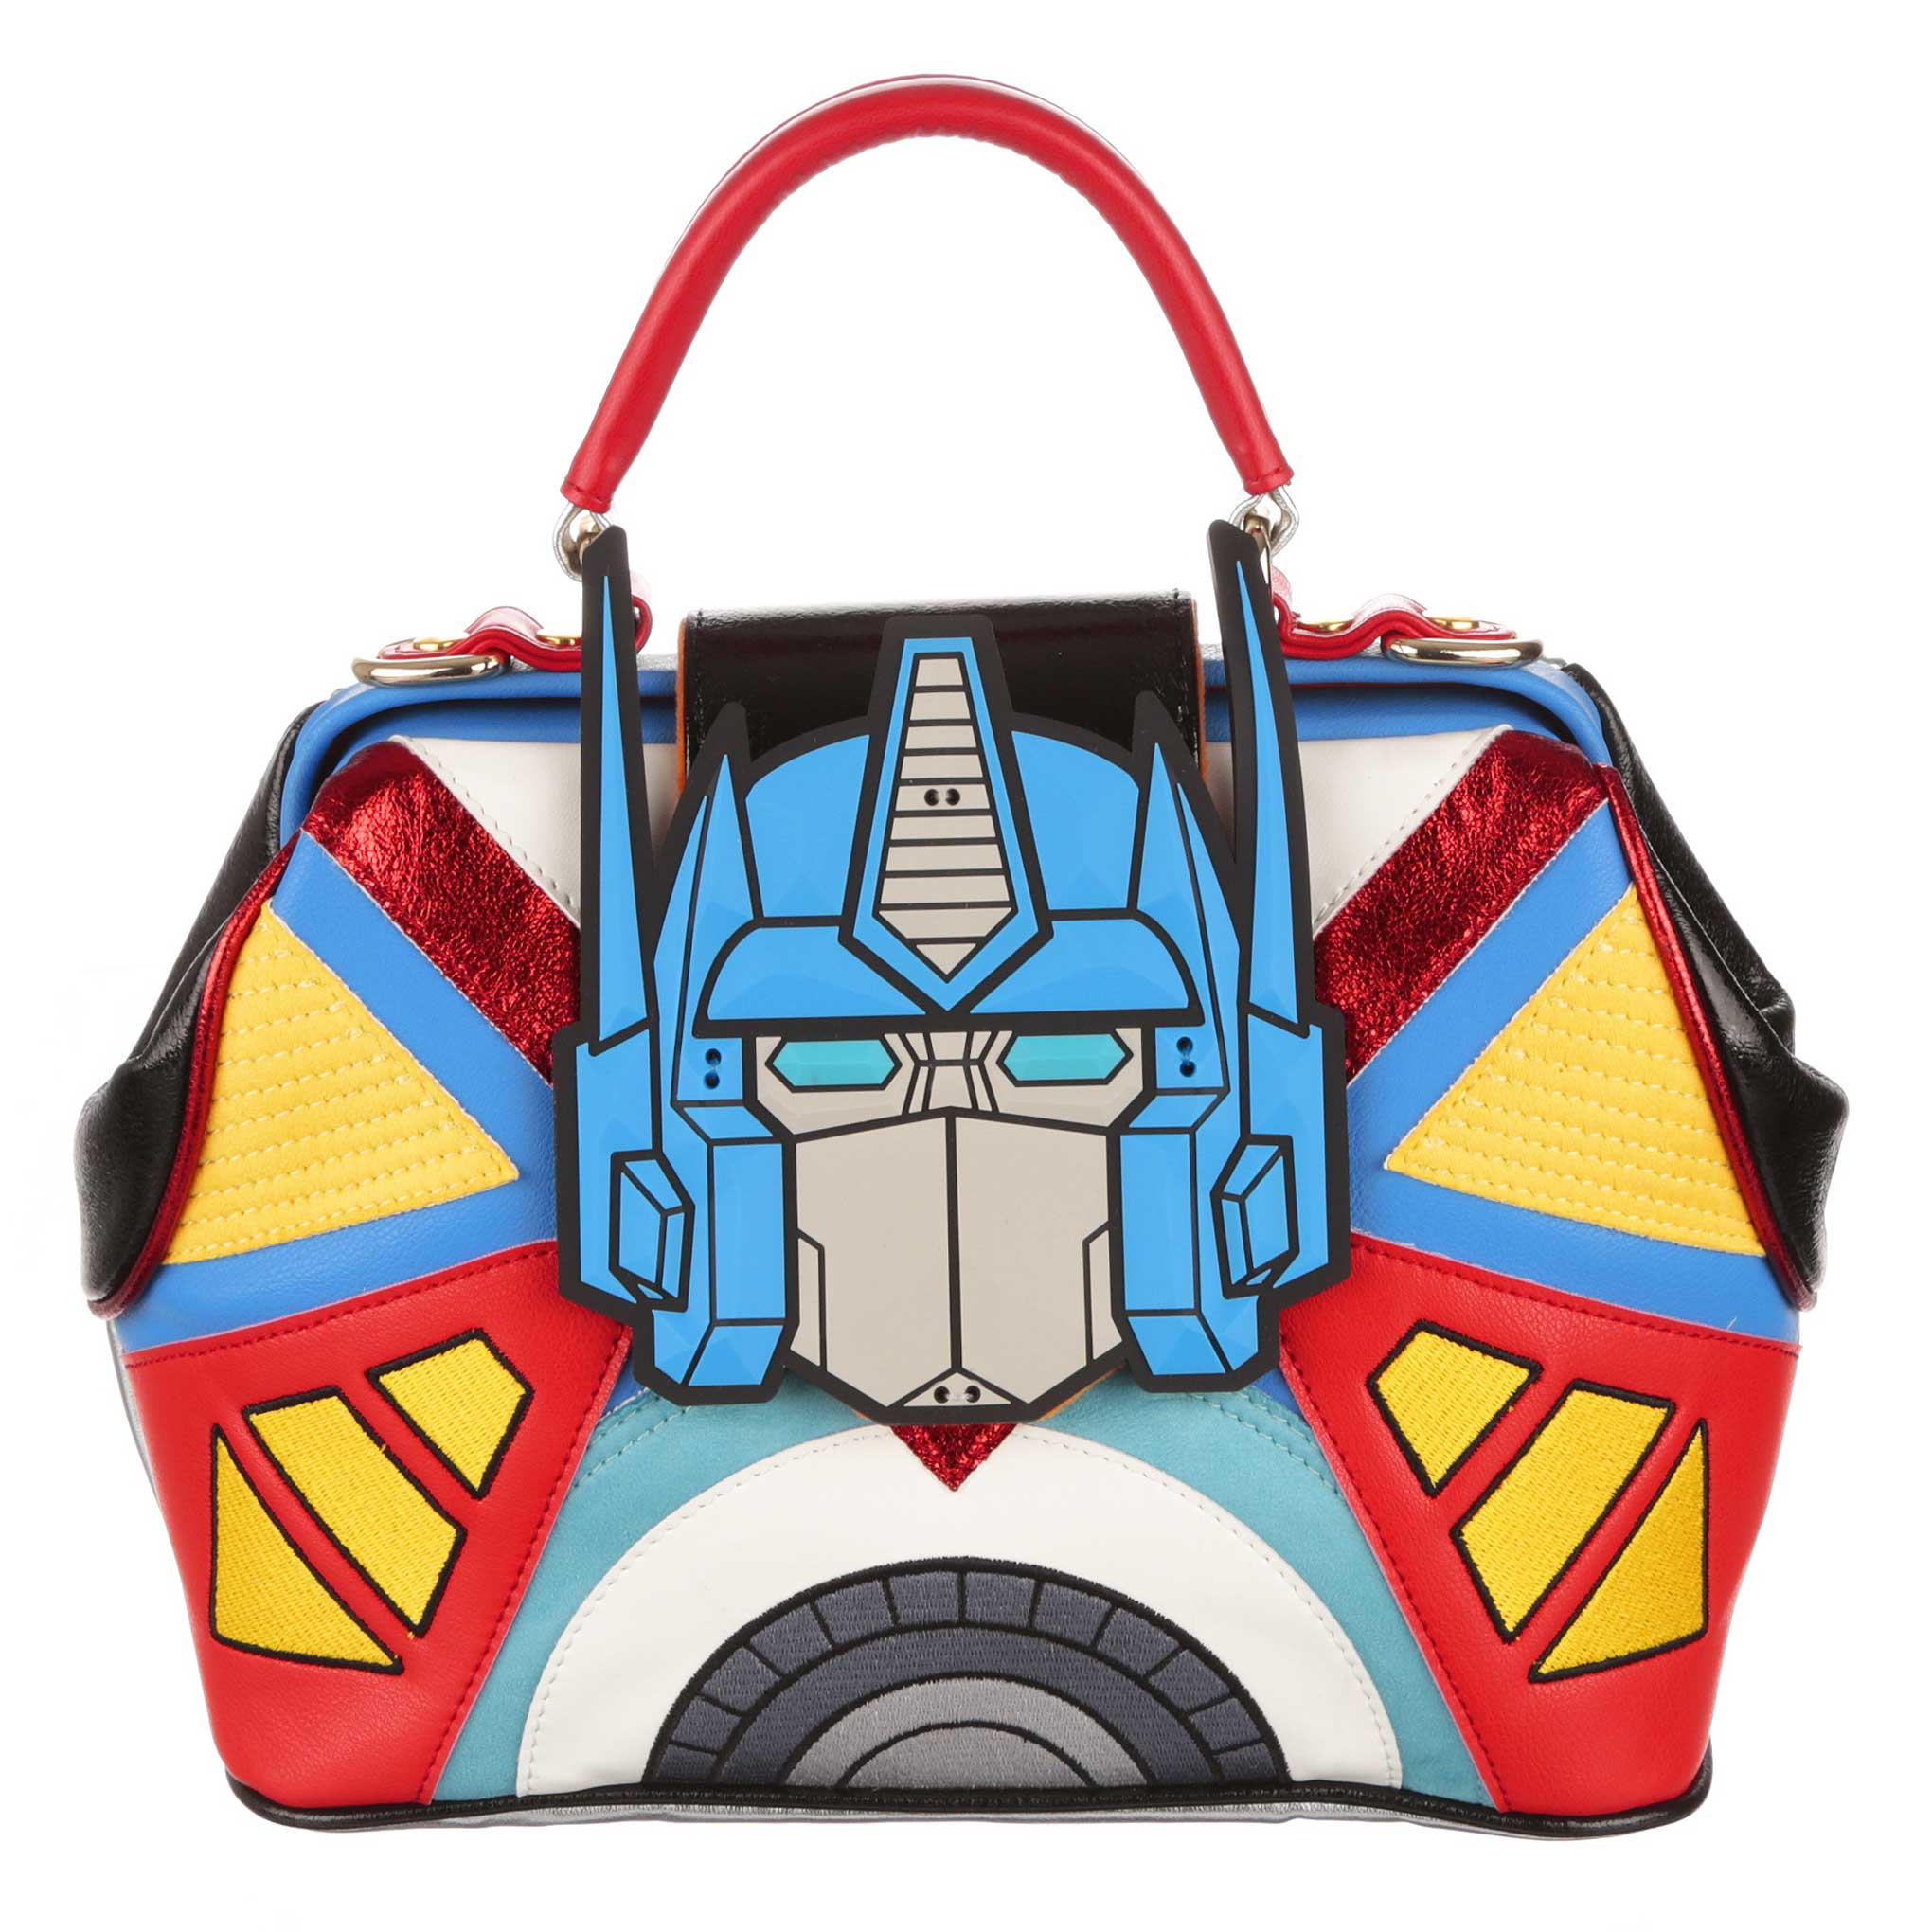 A multicoloured Transformers handbag, made up of blue, red, yellow and white geometric shapes decorated with embroidery stitching. A large blue Optimus Prime decal sits at the centre of the bag. A red handle with silver hardware clips sits at the top of Optimus Prime matching the red piping and completing the handbag.   